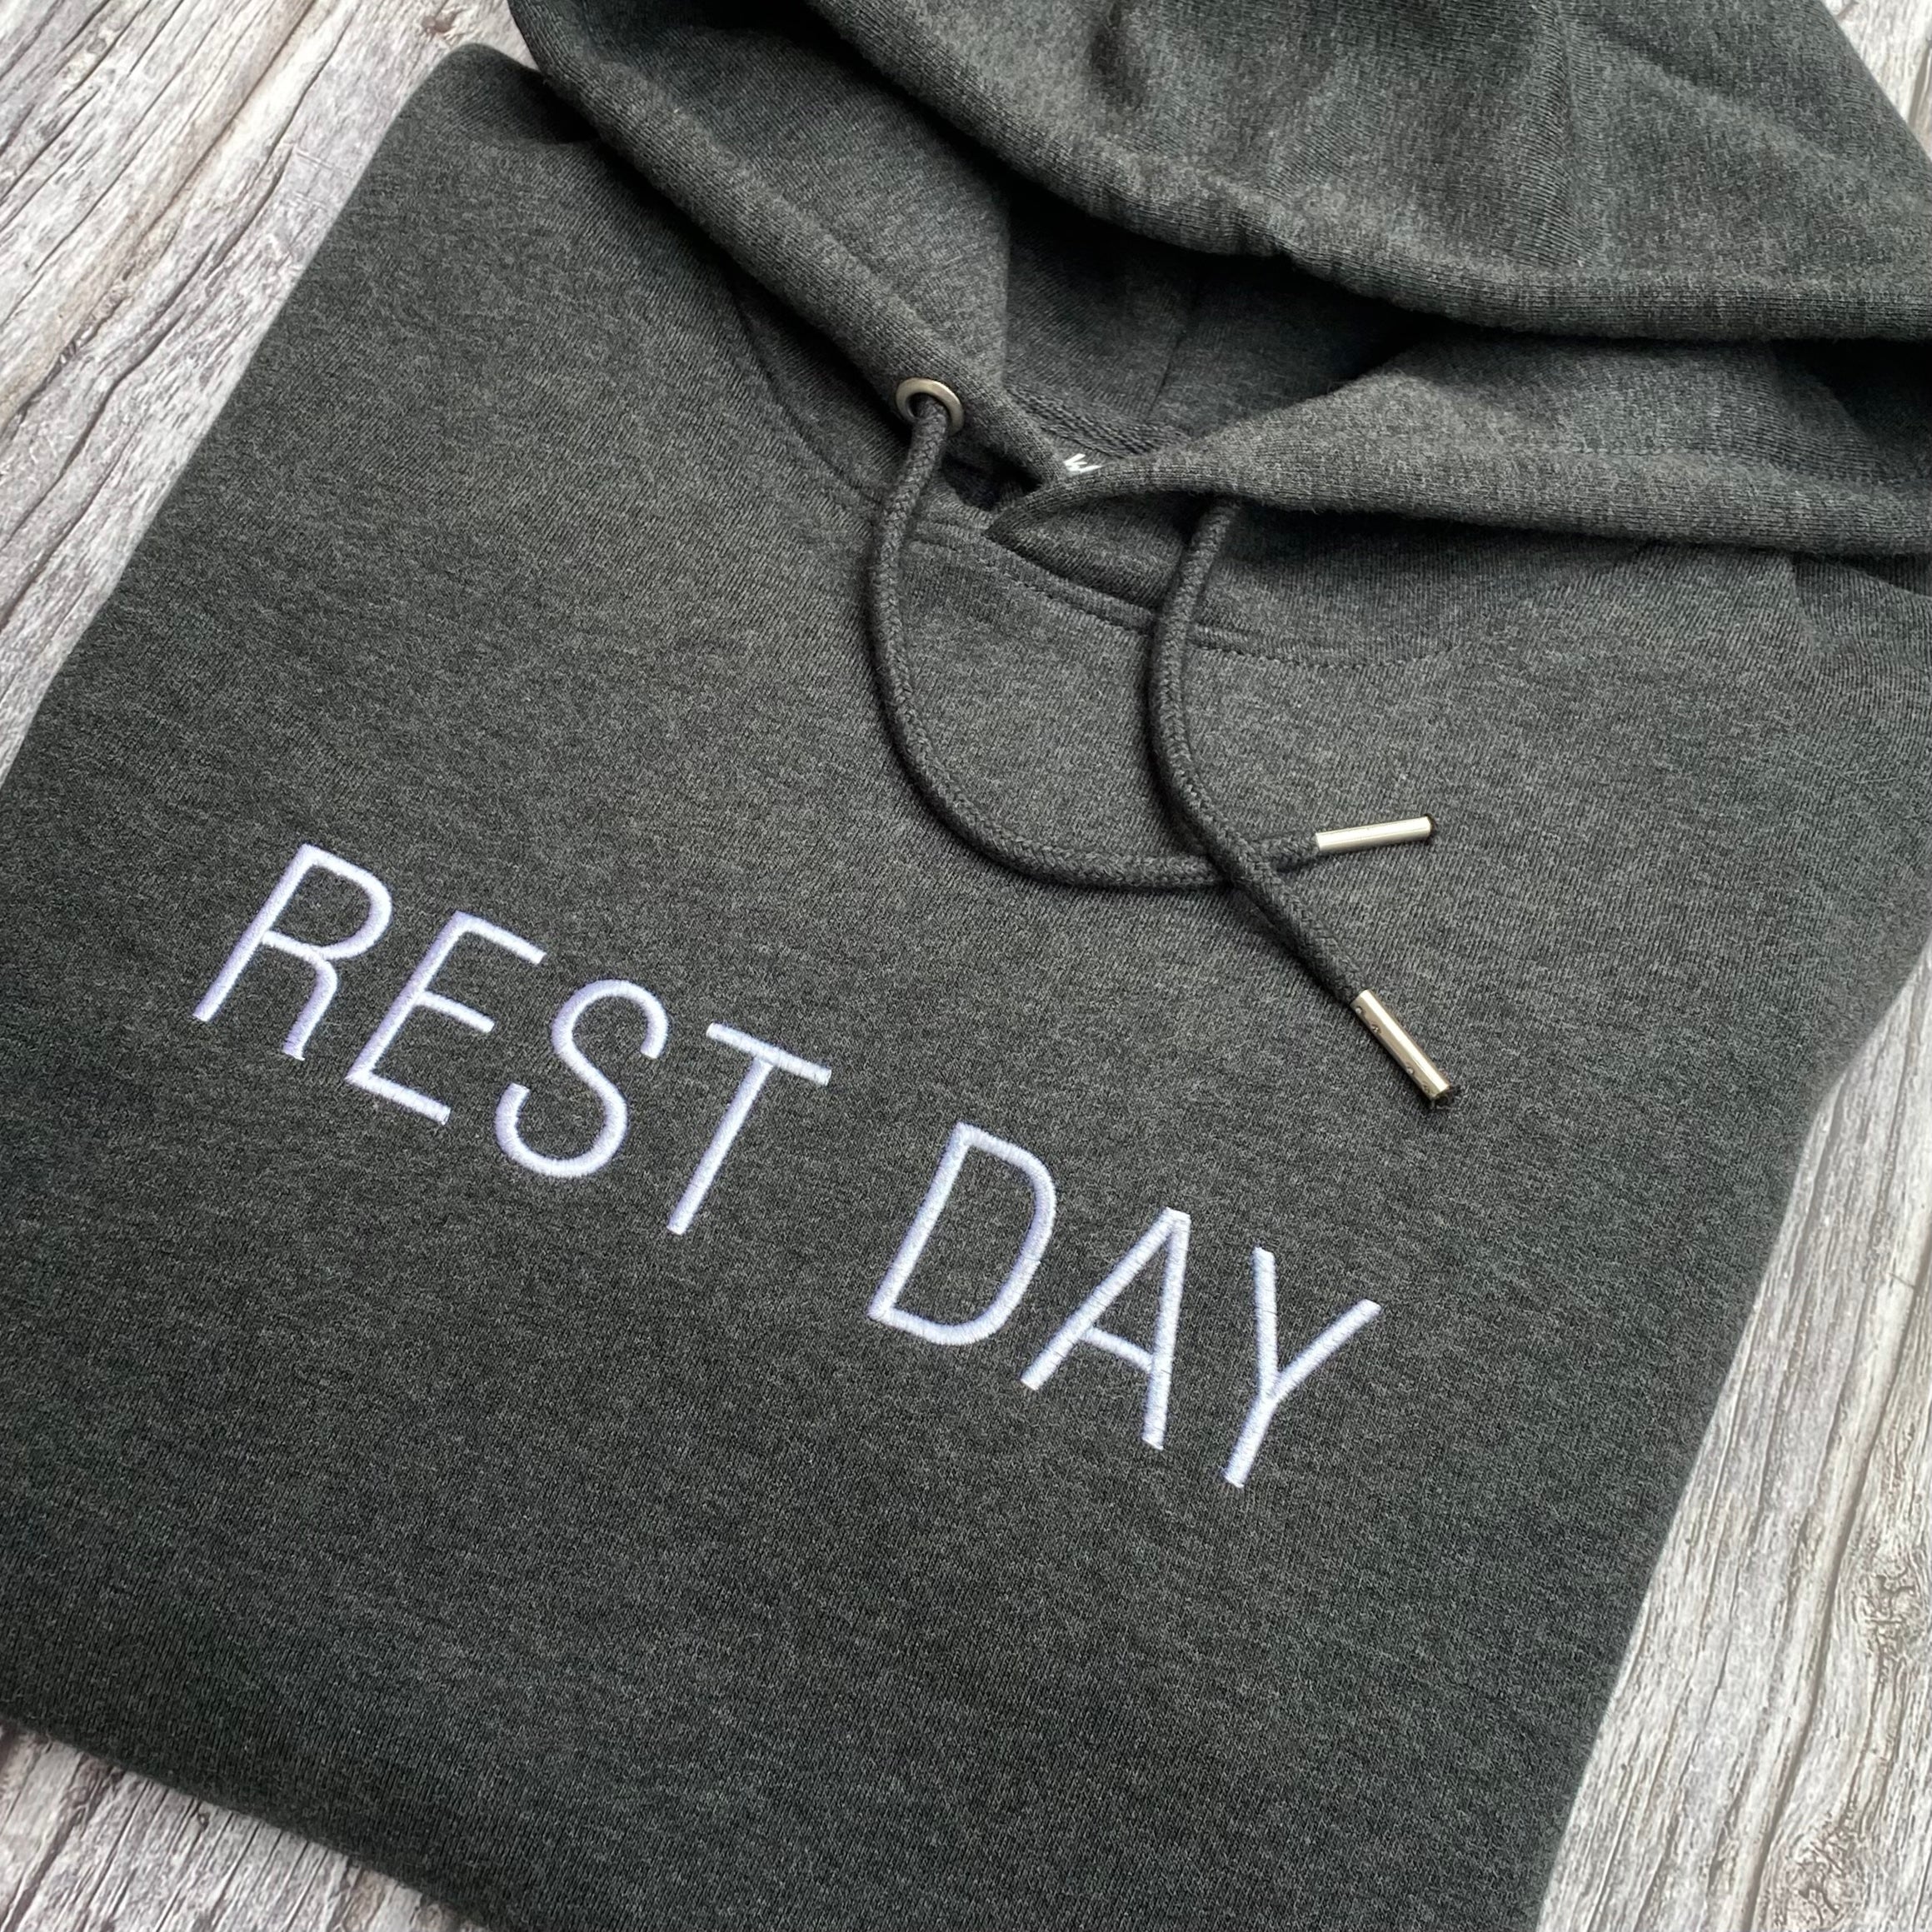 Rest Day Hoodie - Embroidered